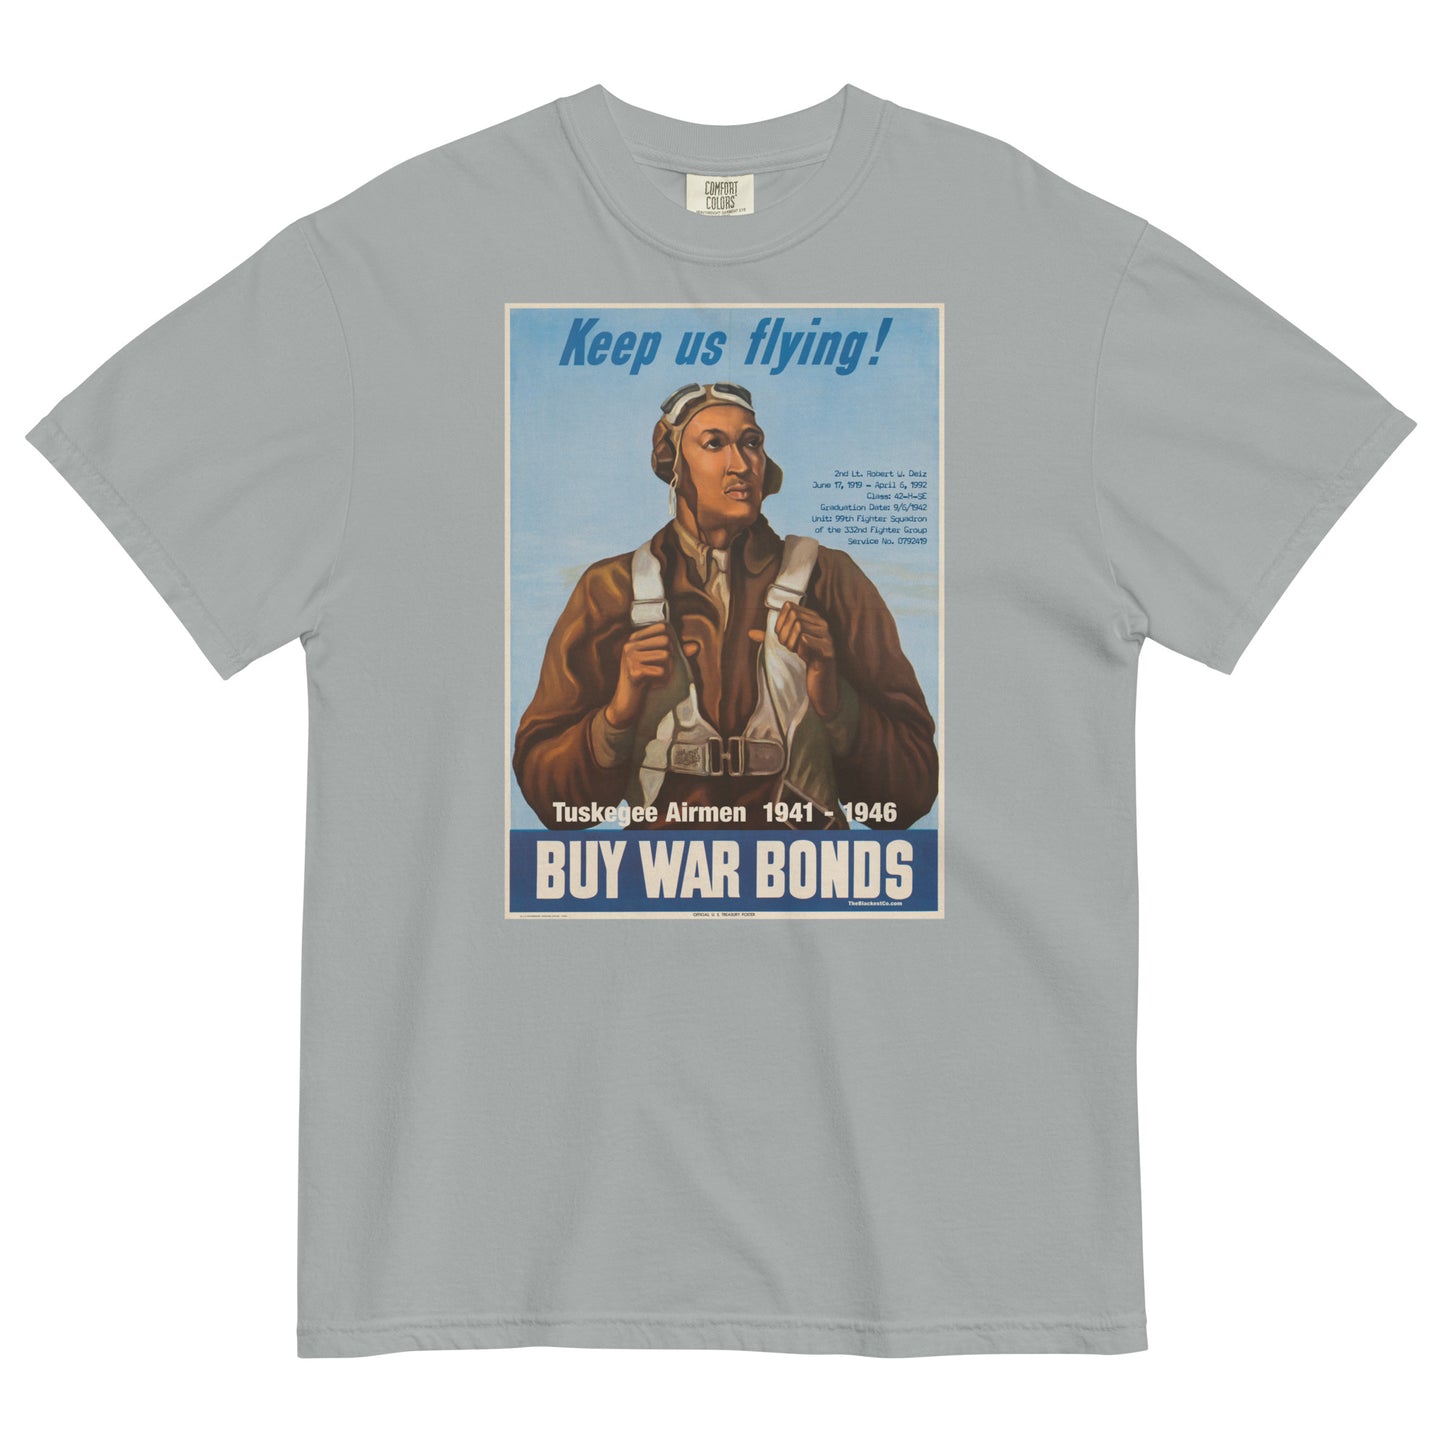 light grey t shirt with the image of an african american wwii pilot and tuskegee airmen written on it